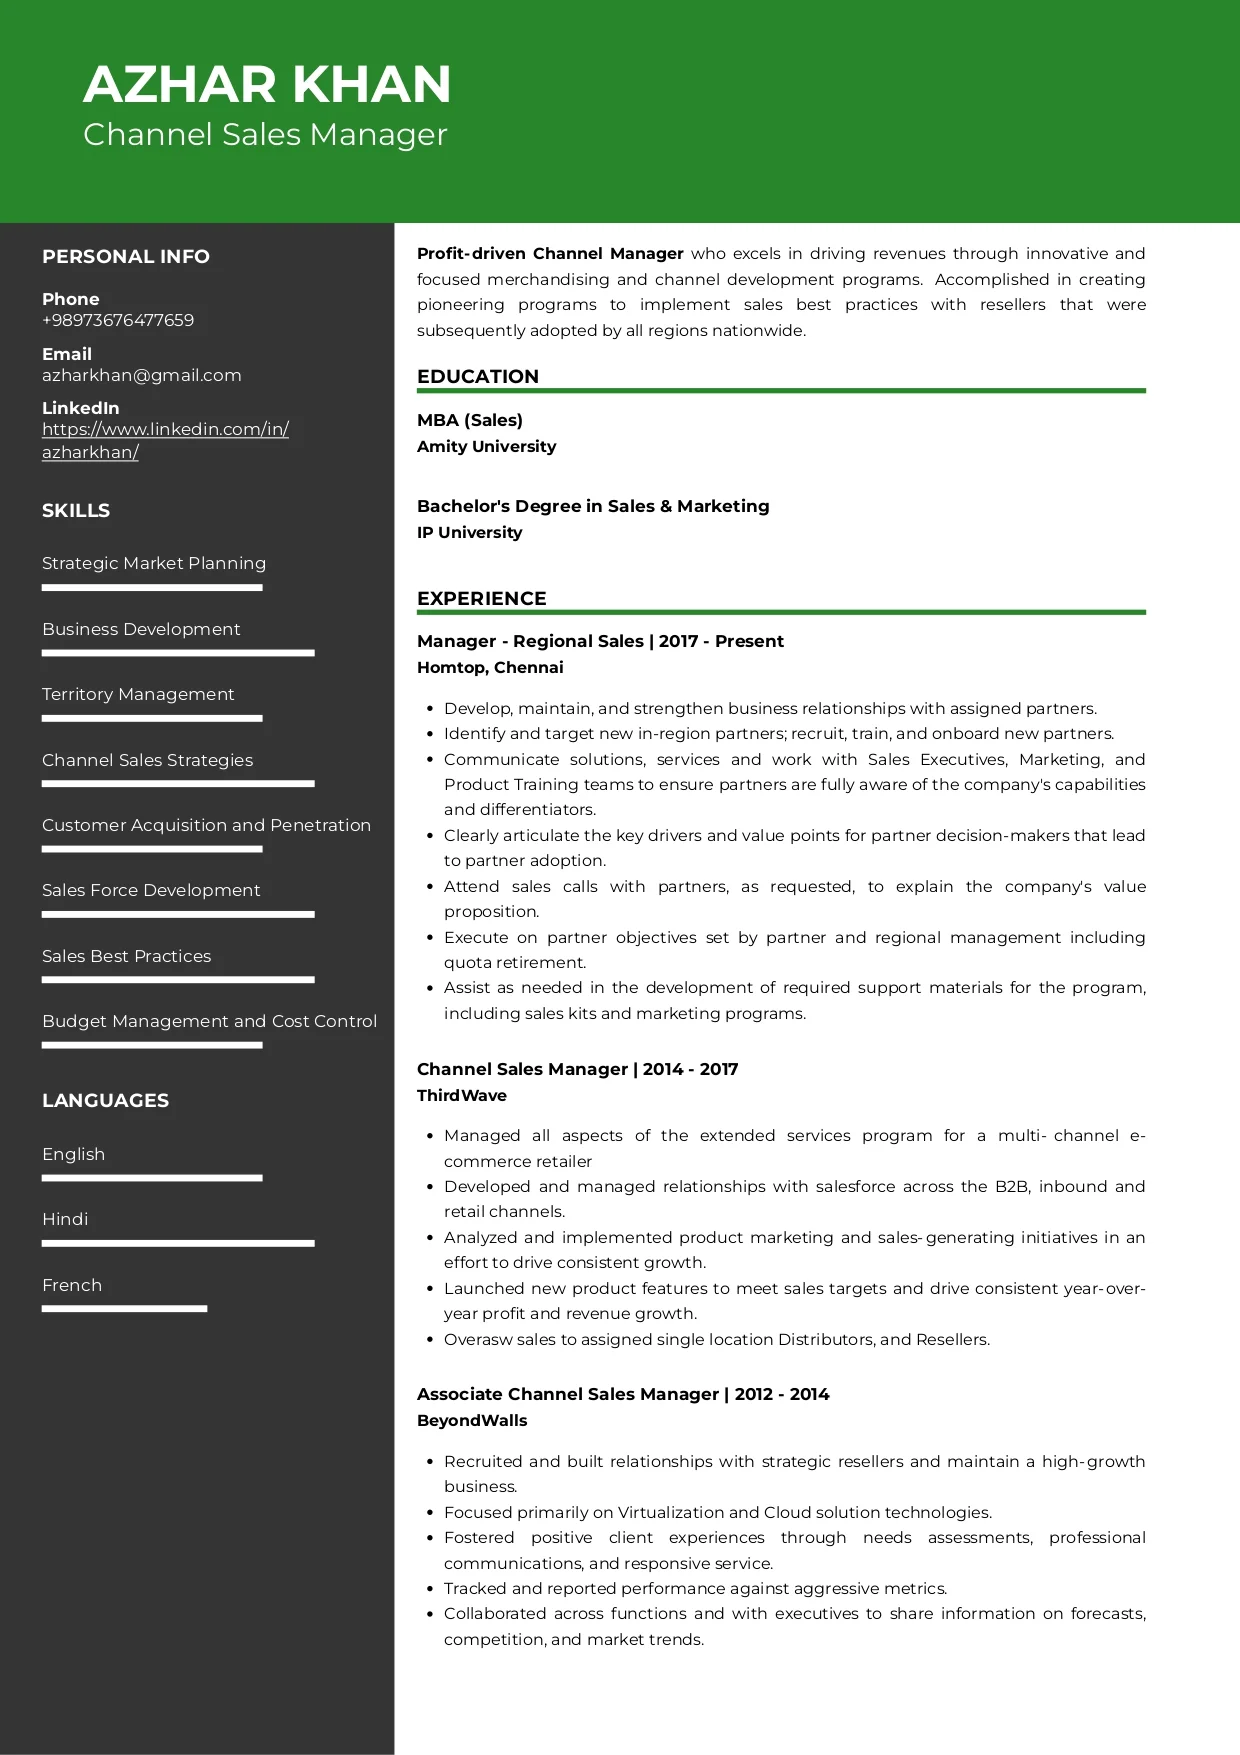 Sample Resume of Channel Sales Manager | Free Resume Templates & Samples on Resumod.co